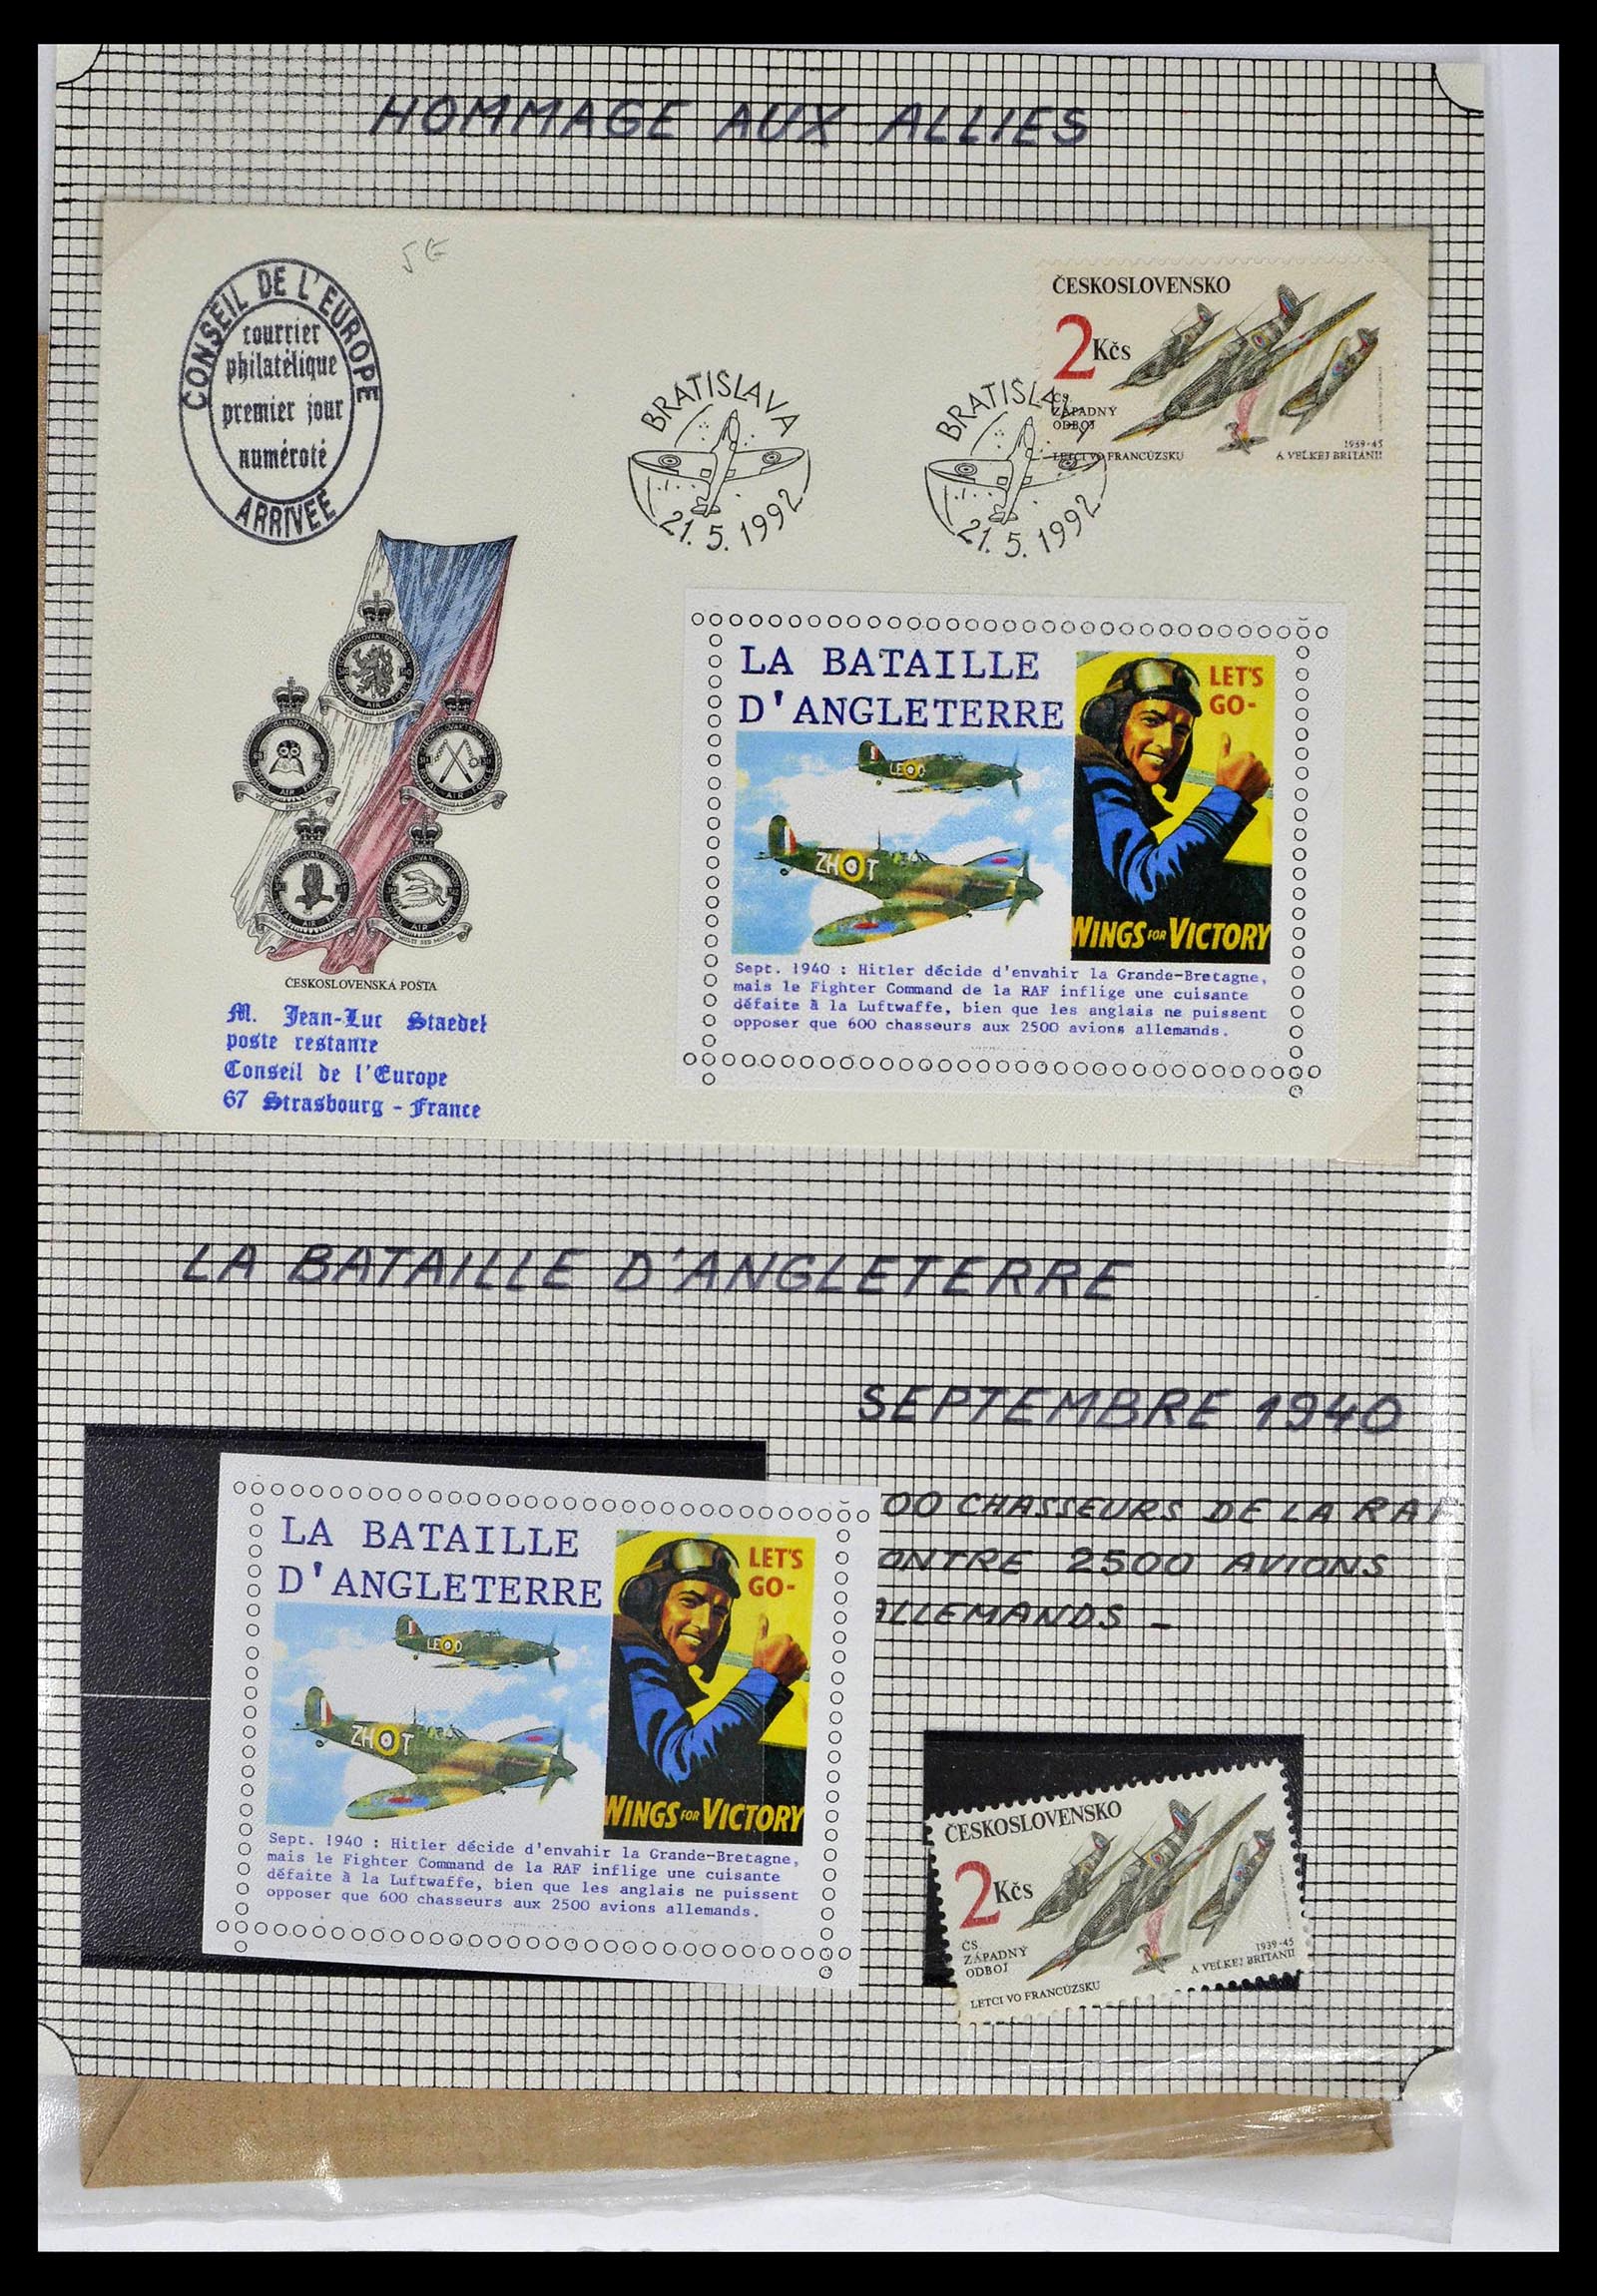 39101 0003 - Stamp collection 39101 France military post 1780(!)-2010.